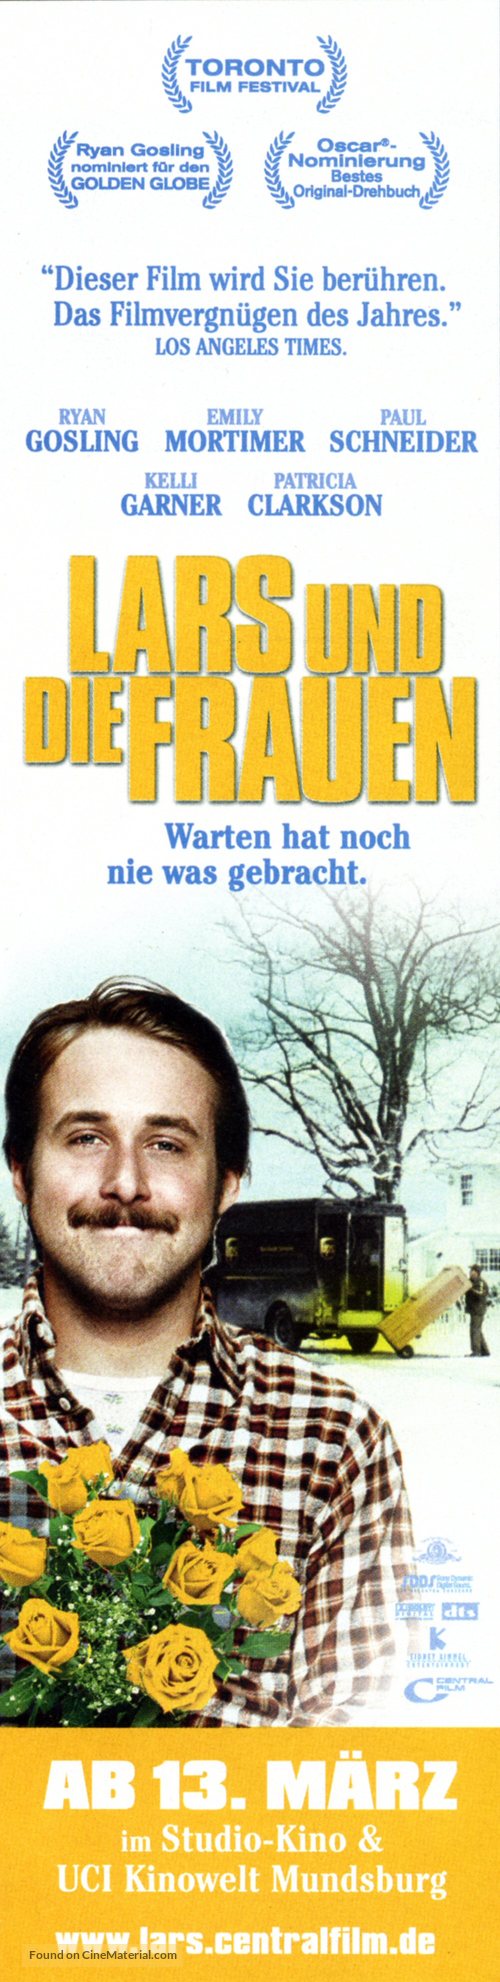 Lars and the Real Girl - German poster